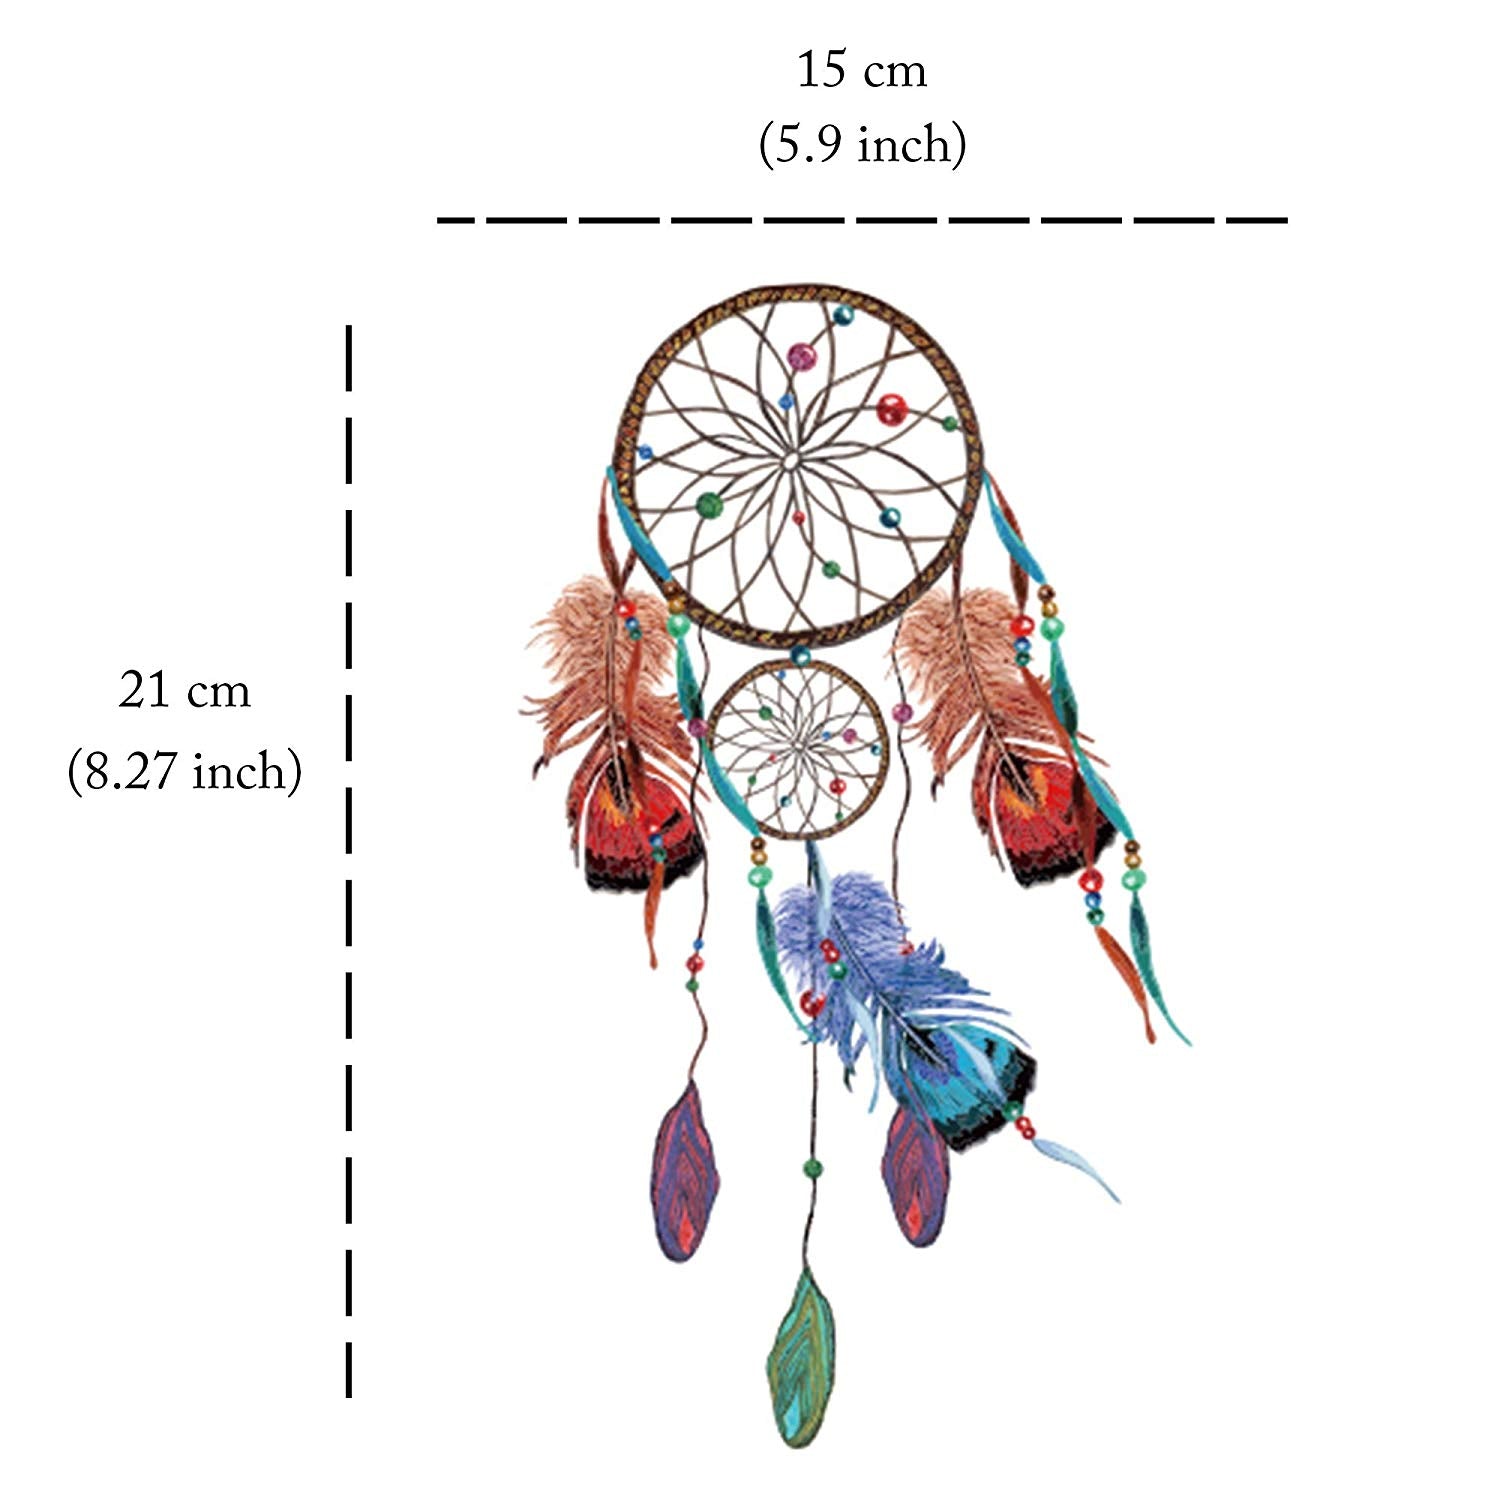 Dreamcatcher Temporary Tattoo (Set of 3) Feathers